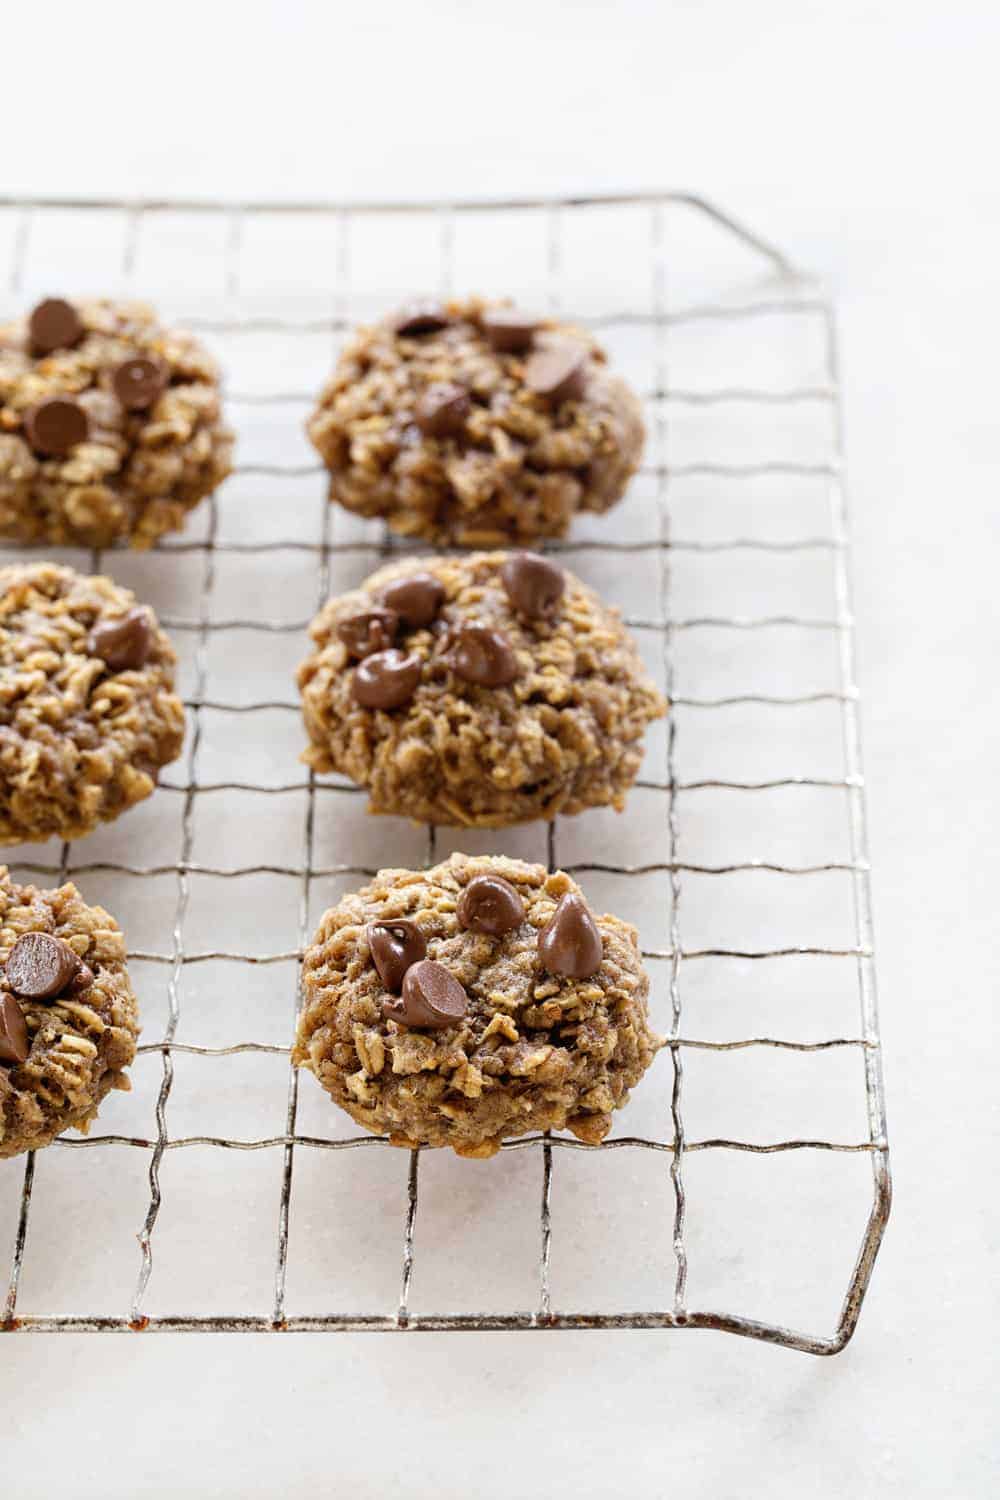 These Banana Oatmeal Cookies are super simple to make and full of banana flavor.